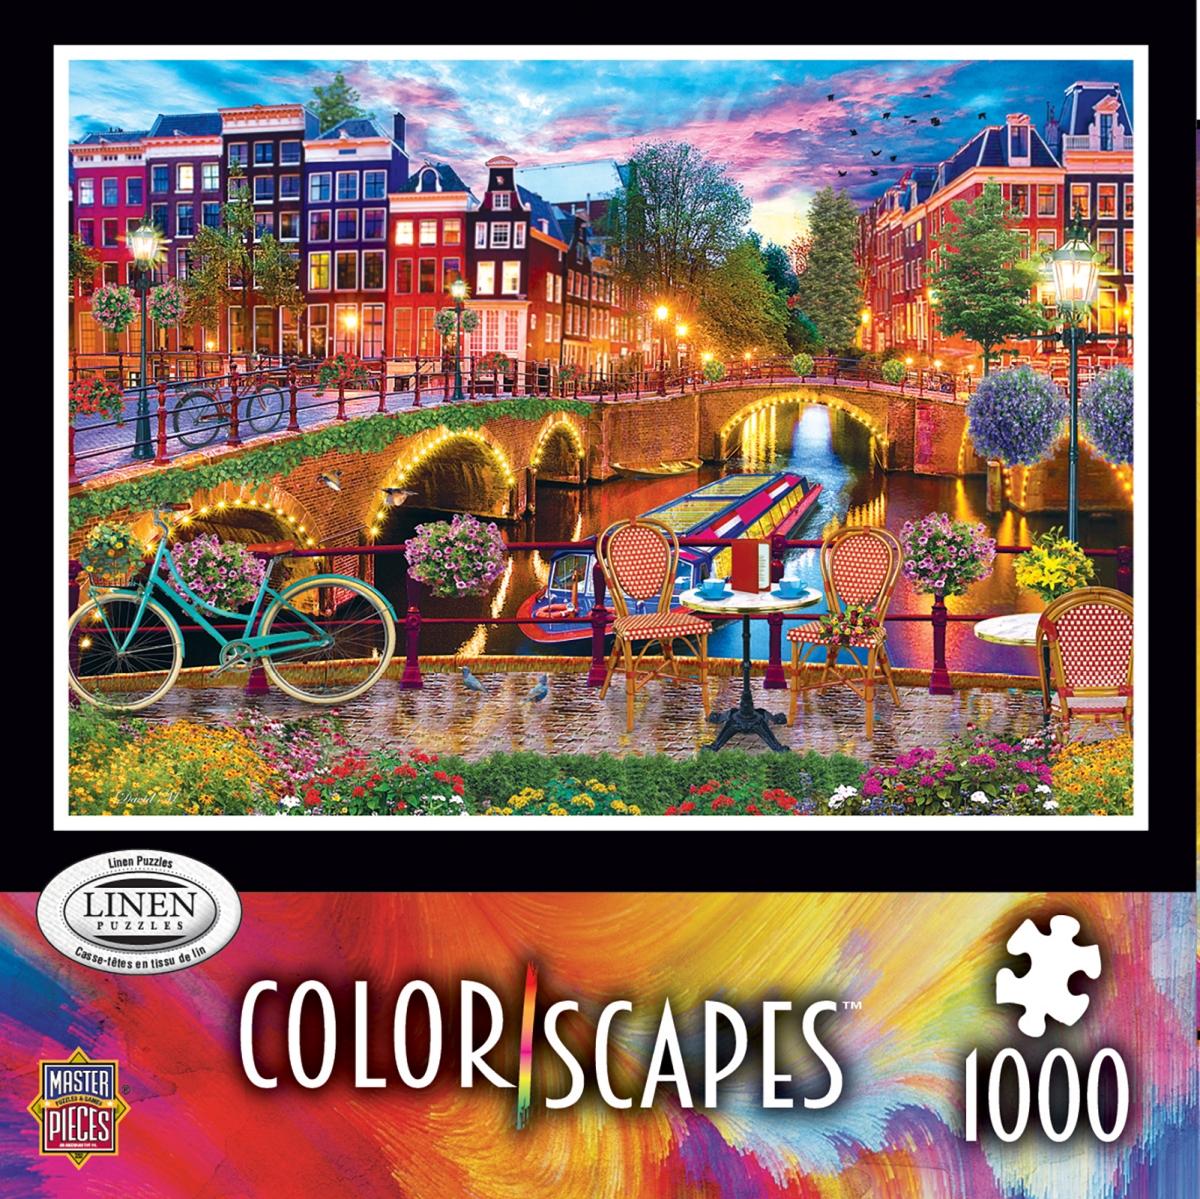 71926 19.25 X 26.75 In. Colorscapes Linen Amsterdam Lights Jigsaw Puzzle - 1000 Piece